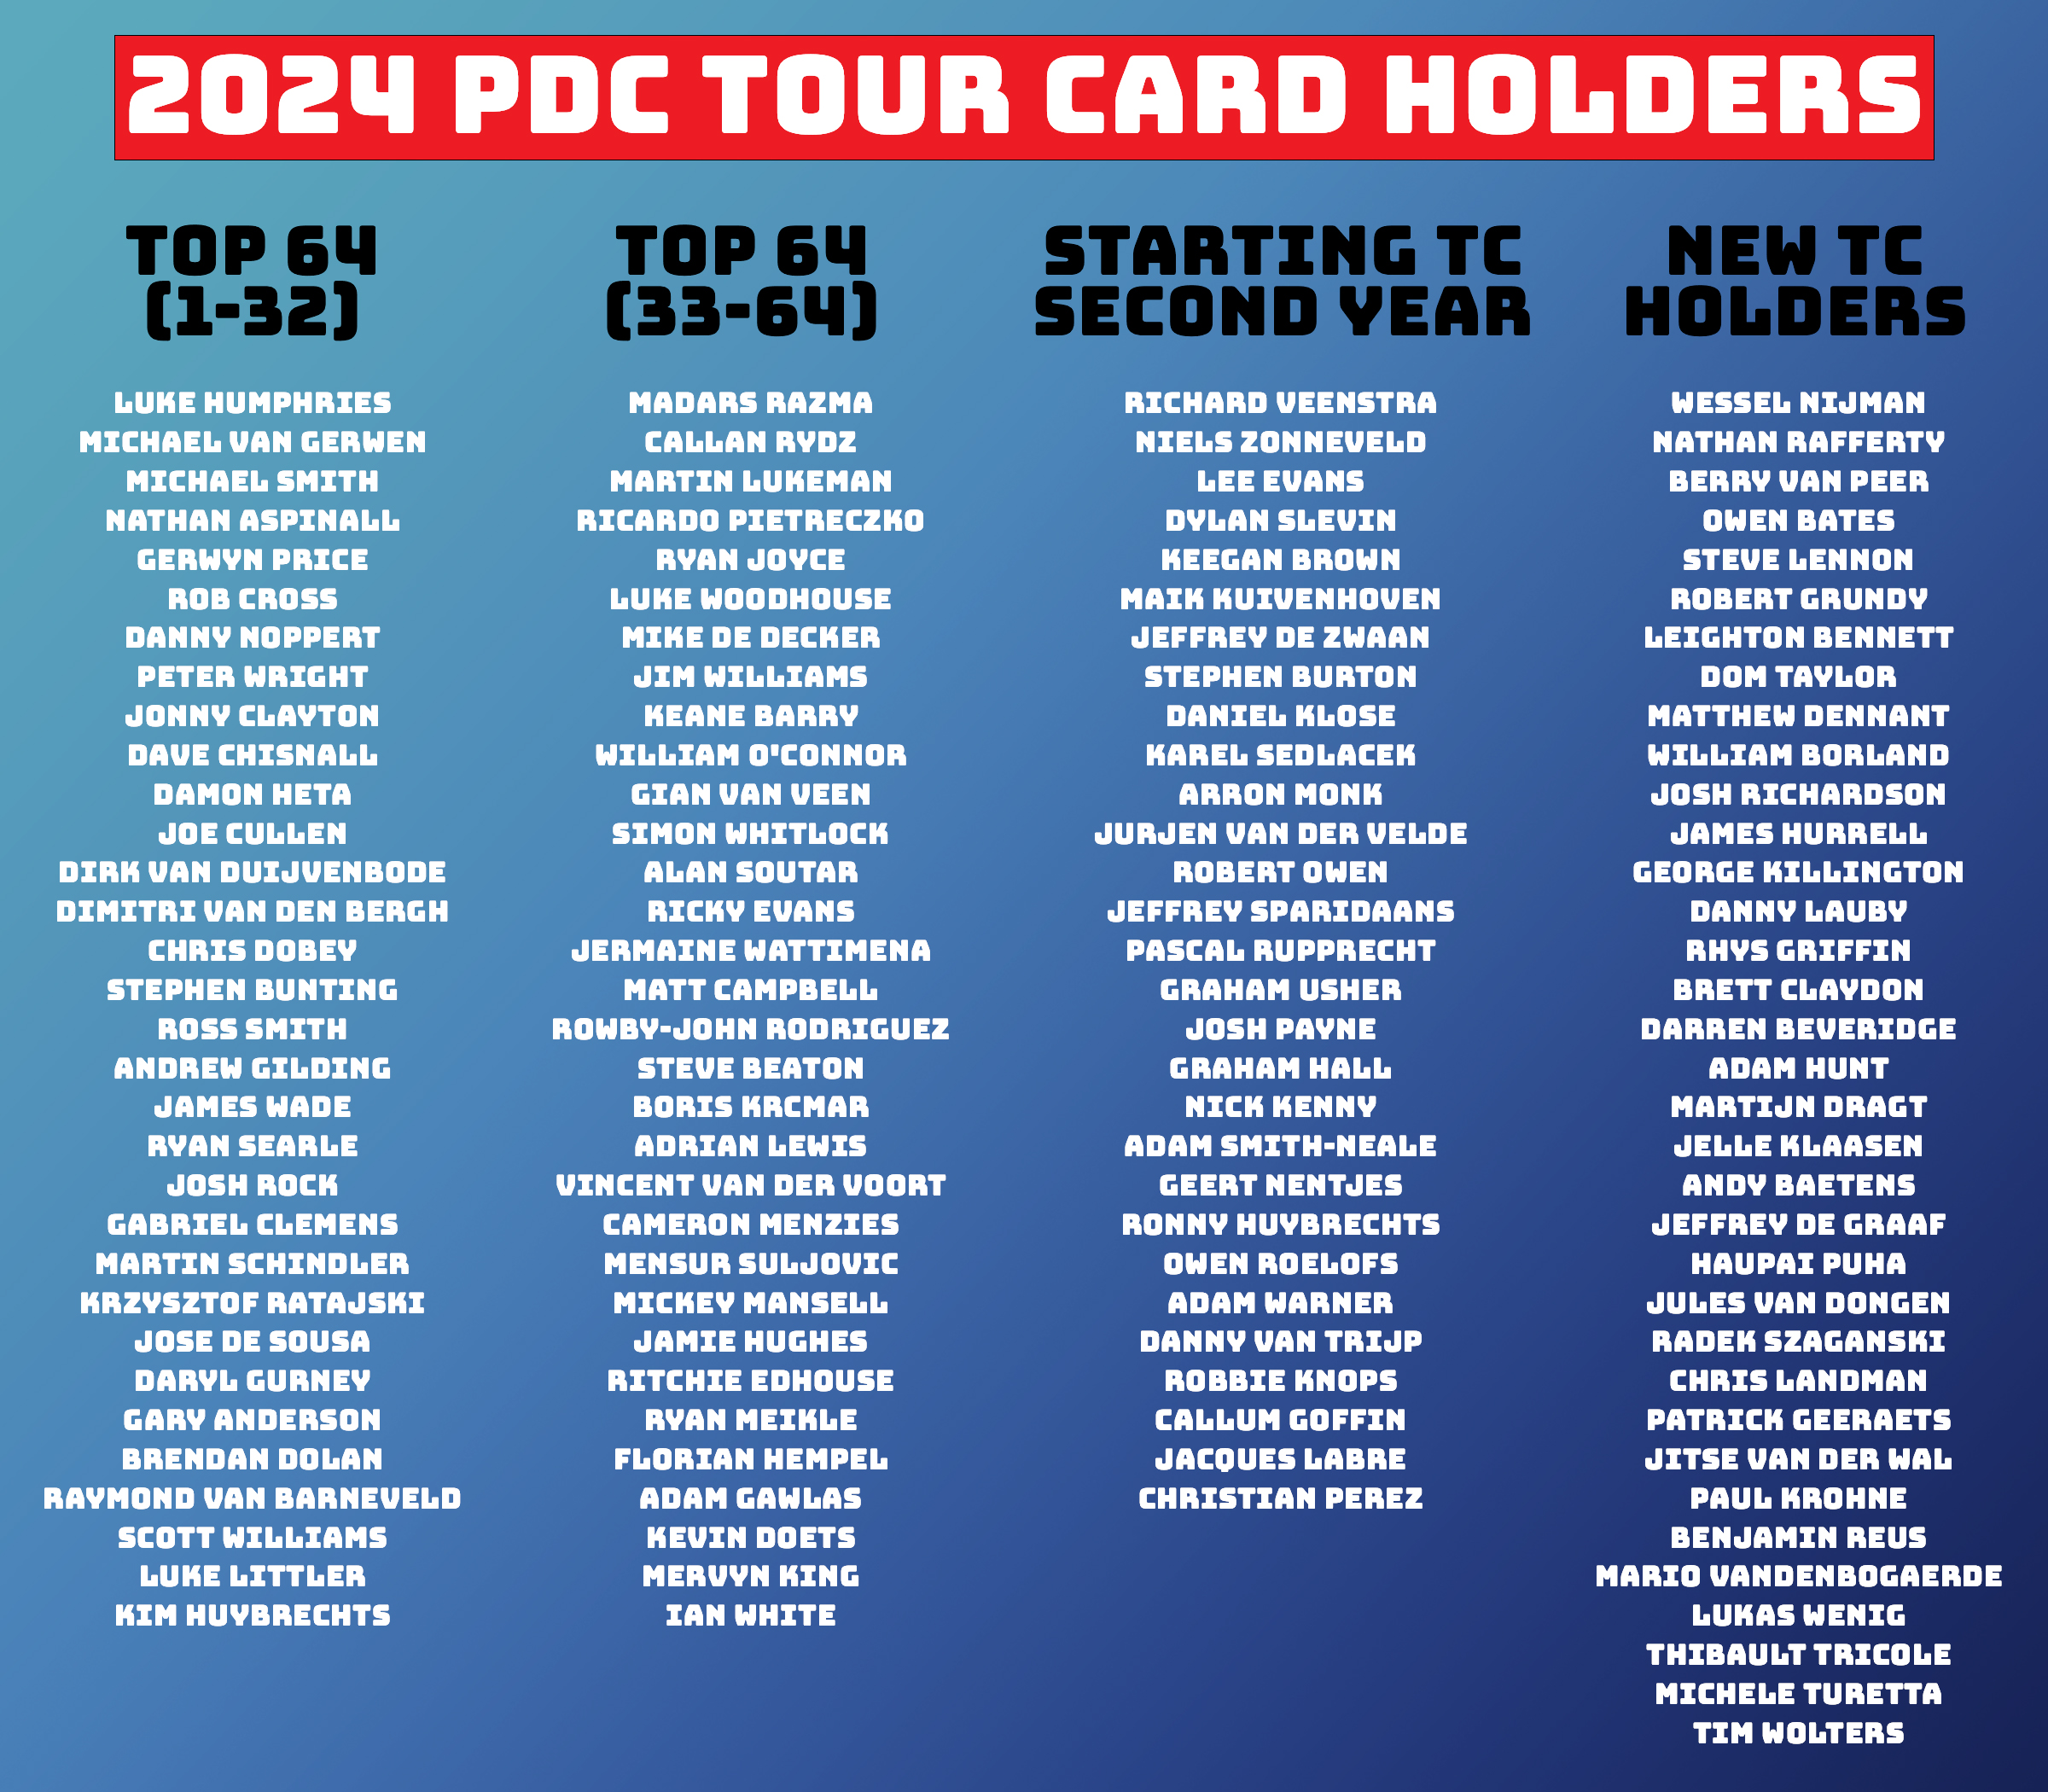 2024 PDC Tour Card Holders